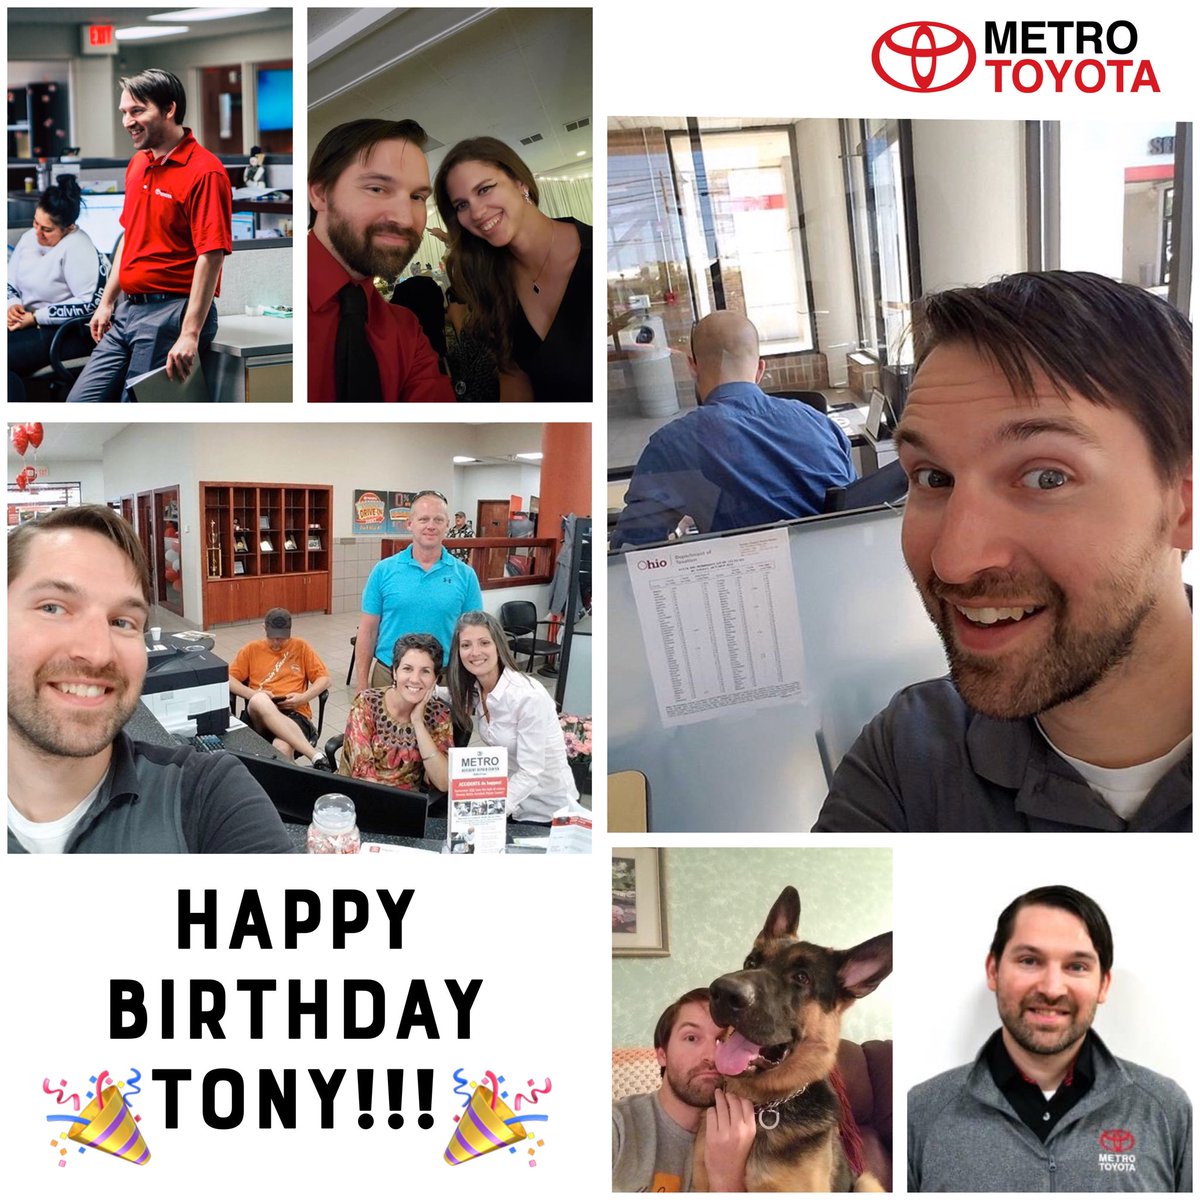 What a week of birthdays! 🎊

Wishing a happy birthday to the wonderful Tony Overman!  

Love your family at Metro Toyota ❤️

#MetroToyota #family #happybirthday #brookpark #toyotastrong #celebrate